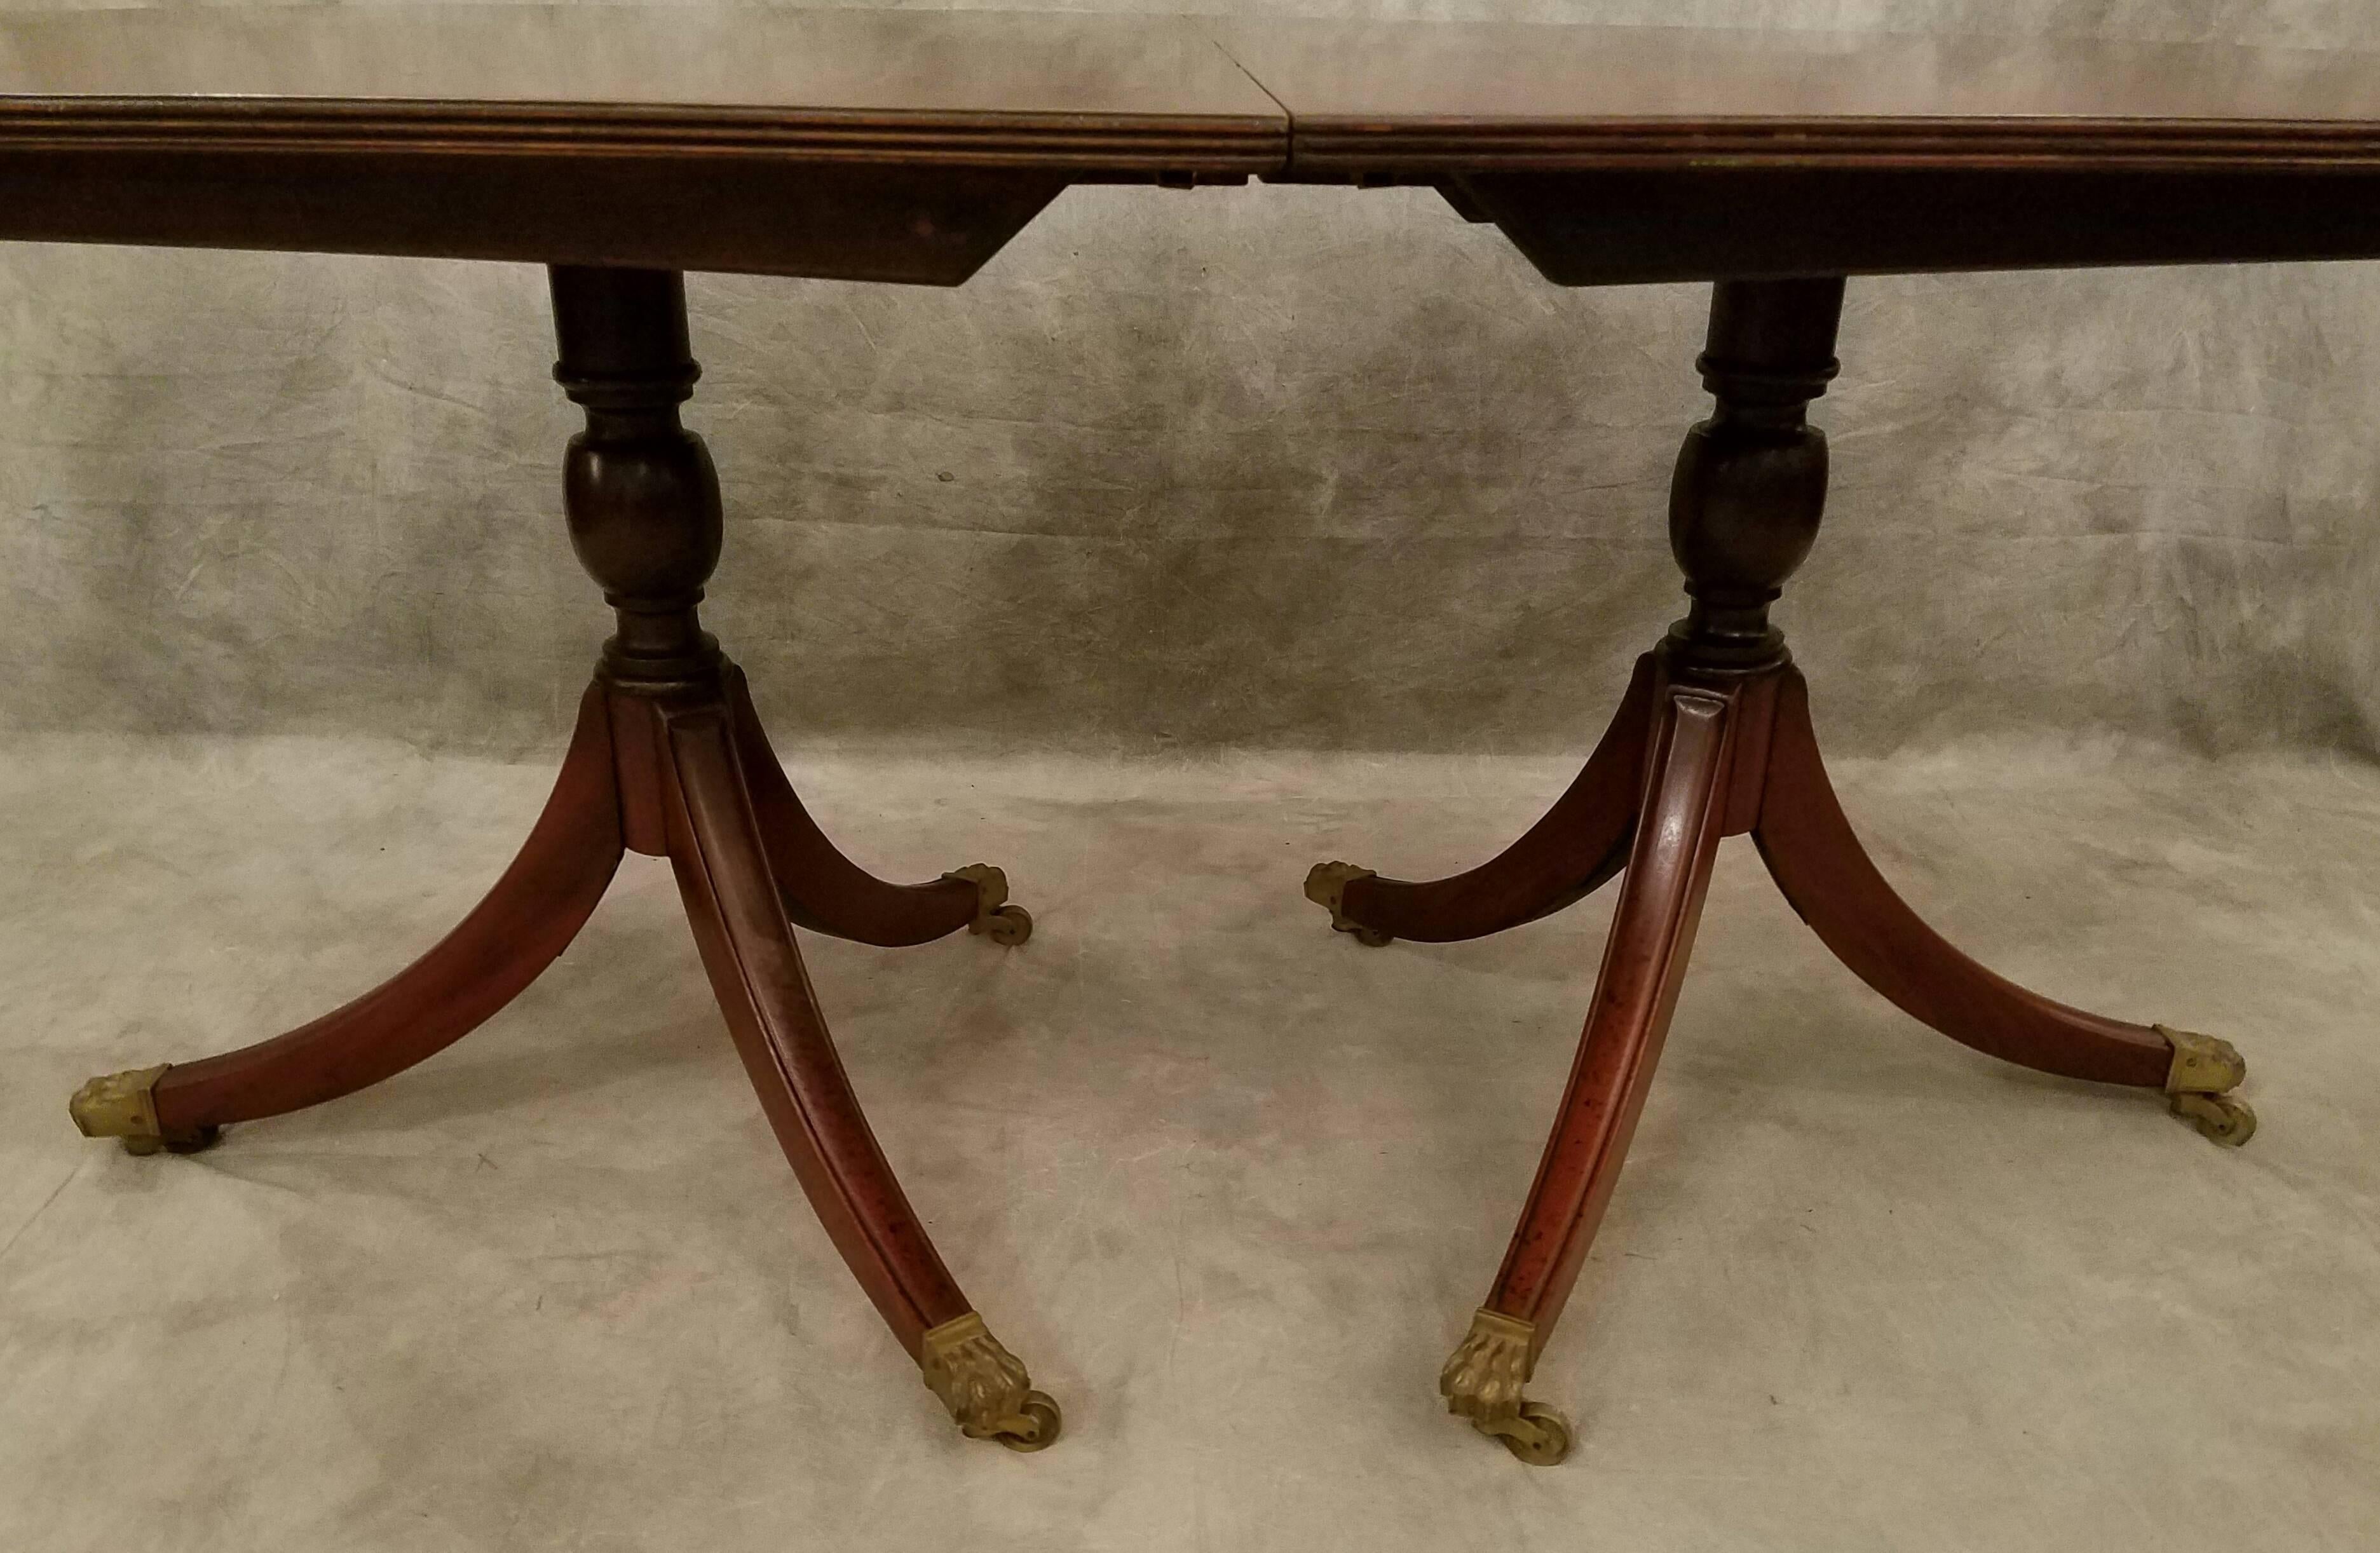 English Regency mahogany double pedestal dining (breakfast) table, with a fluted edge oval top over two baluster form standards with three down-swept legs ending in brass paw and casters.